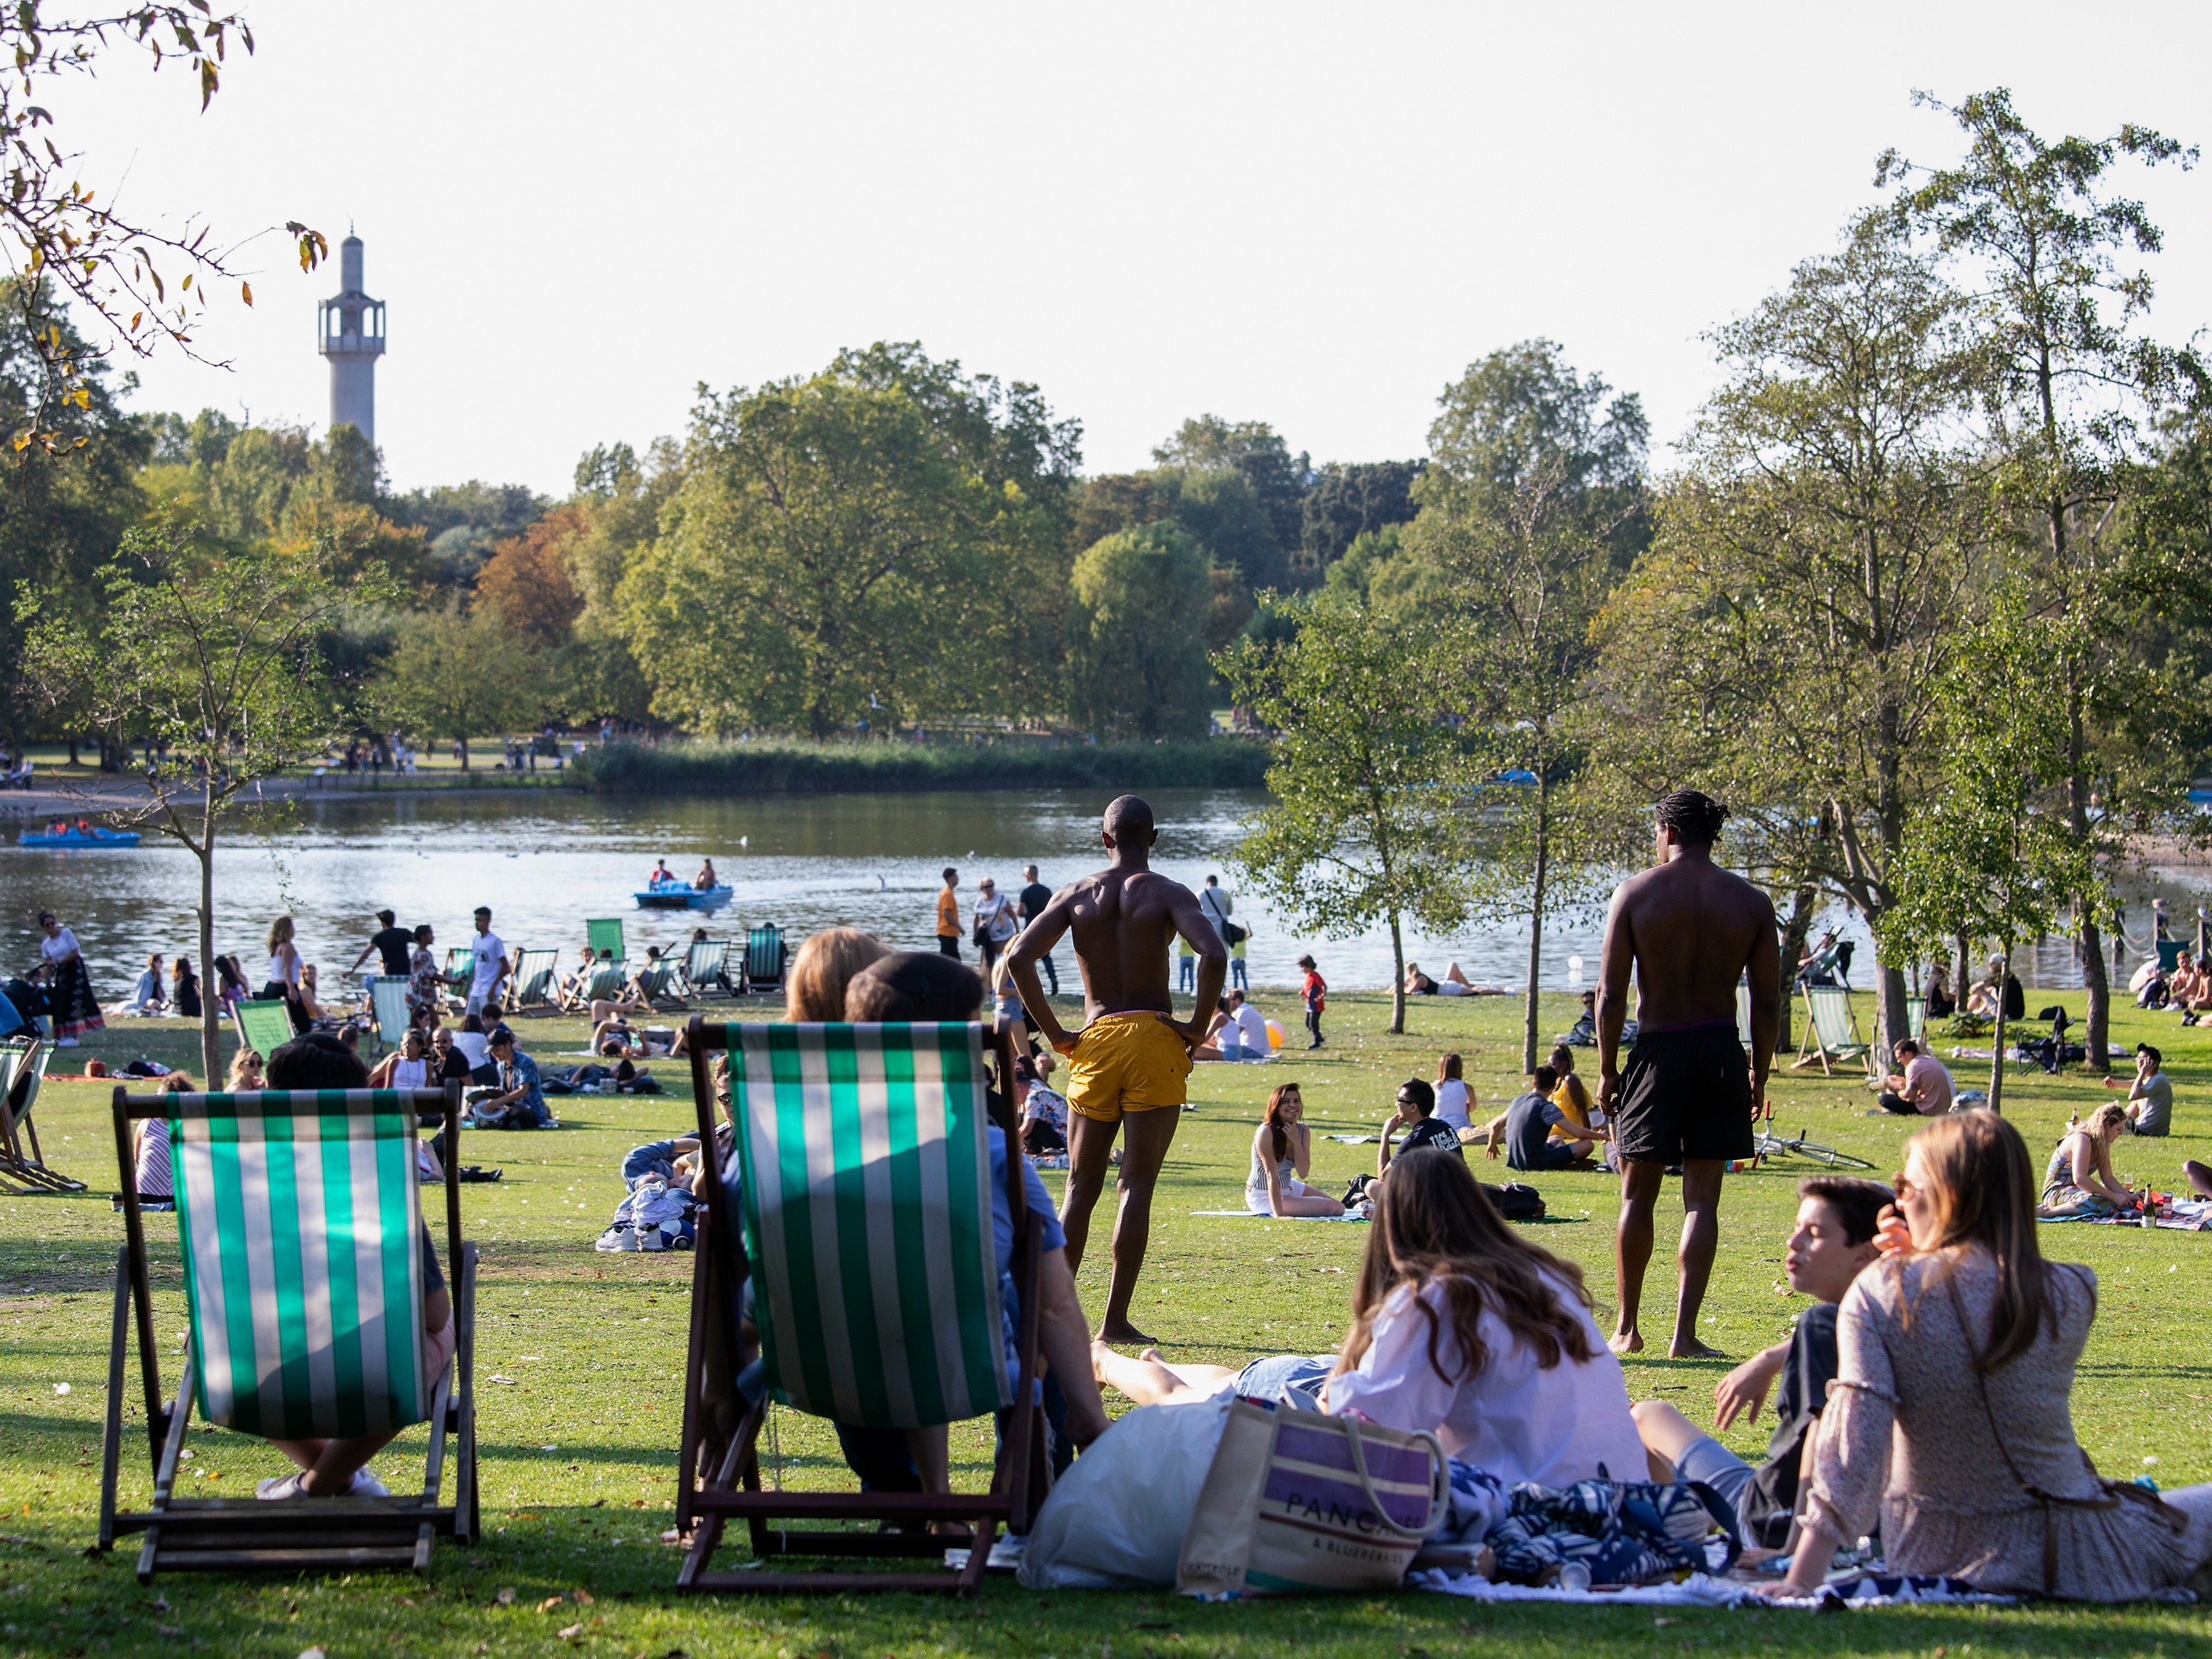 People relaxing in Regents Park by the lake